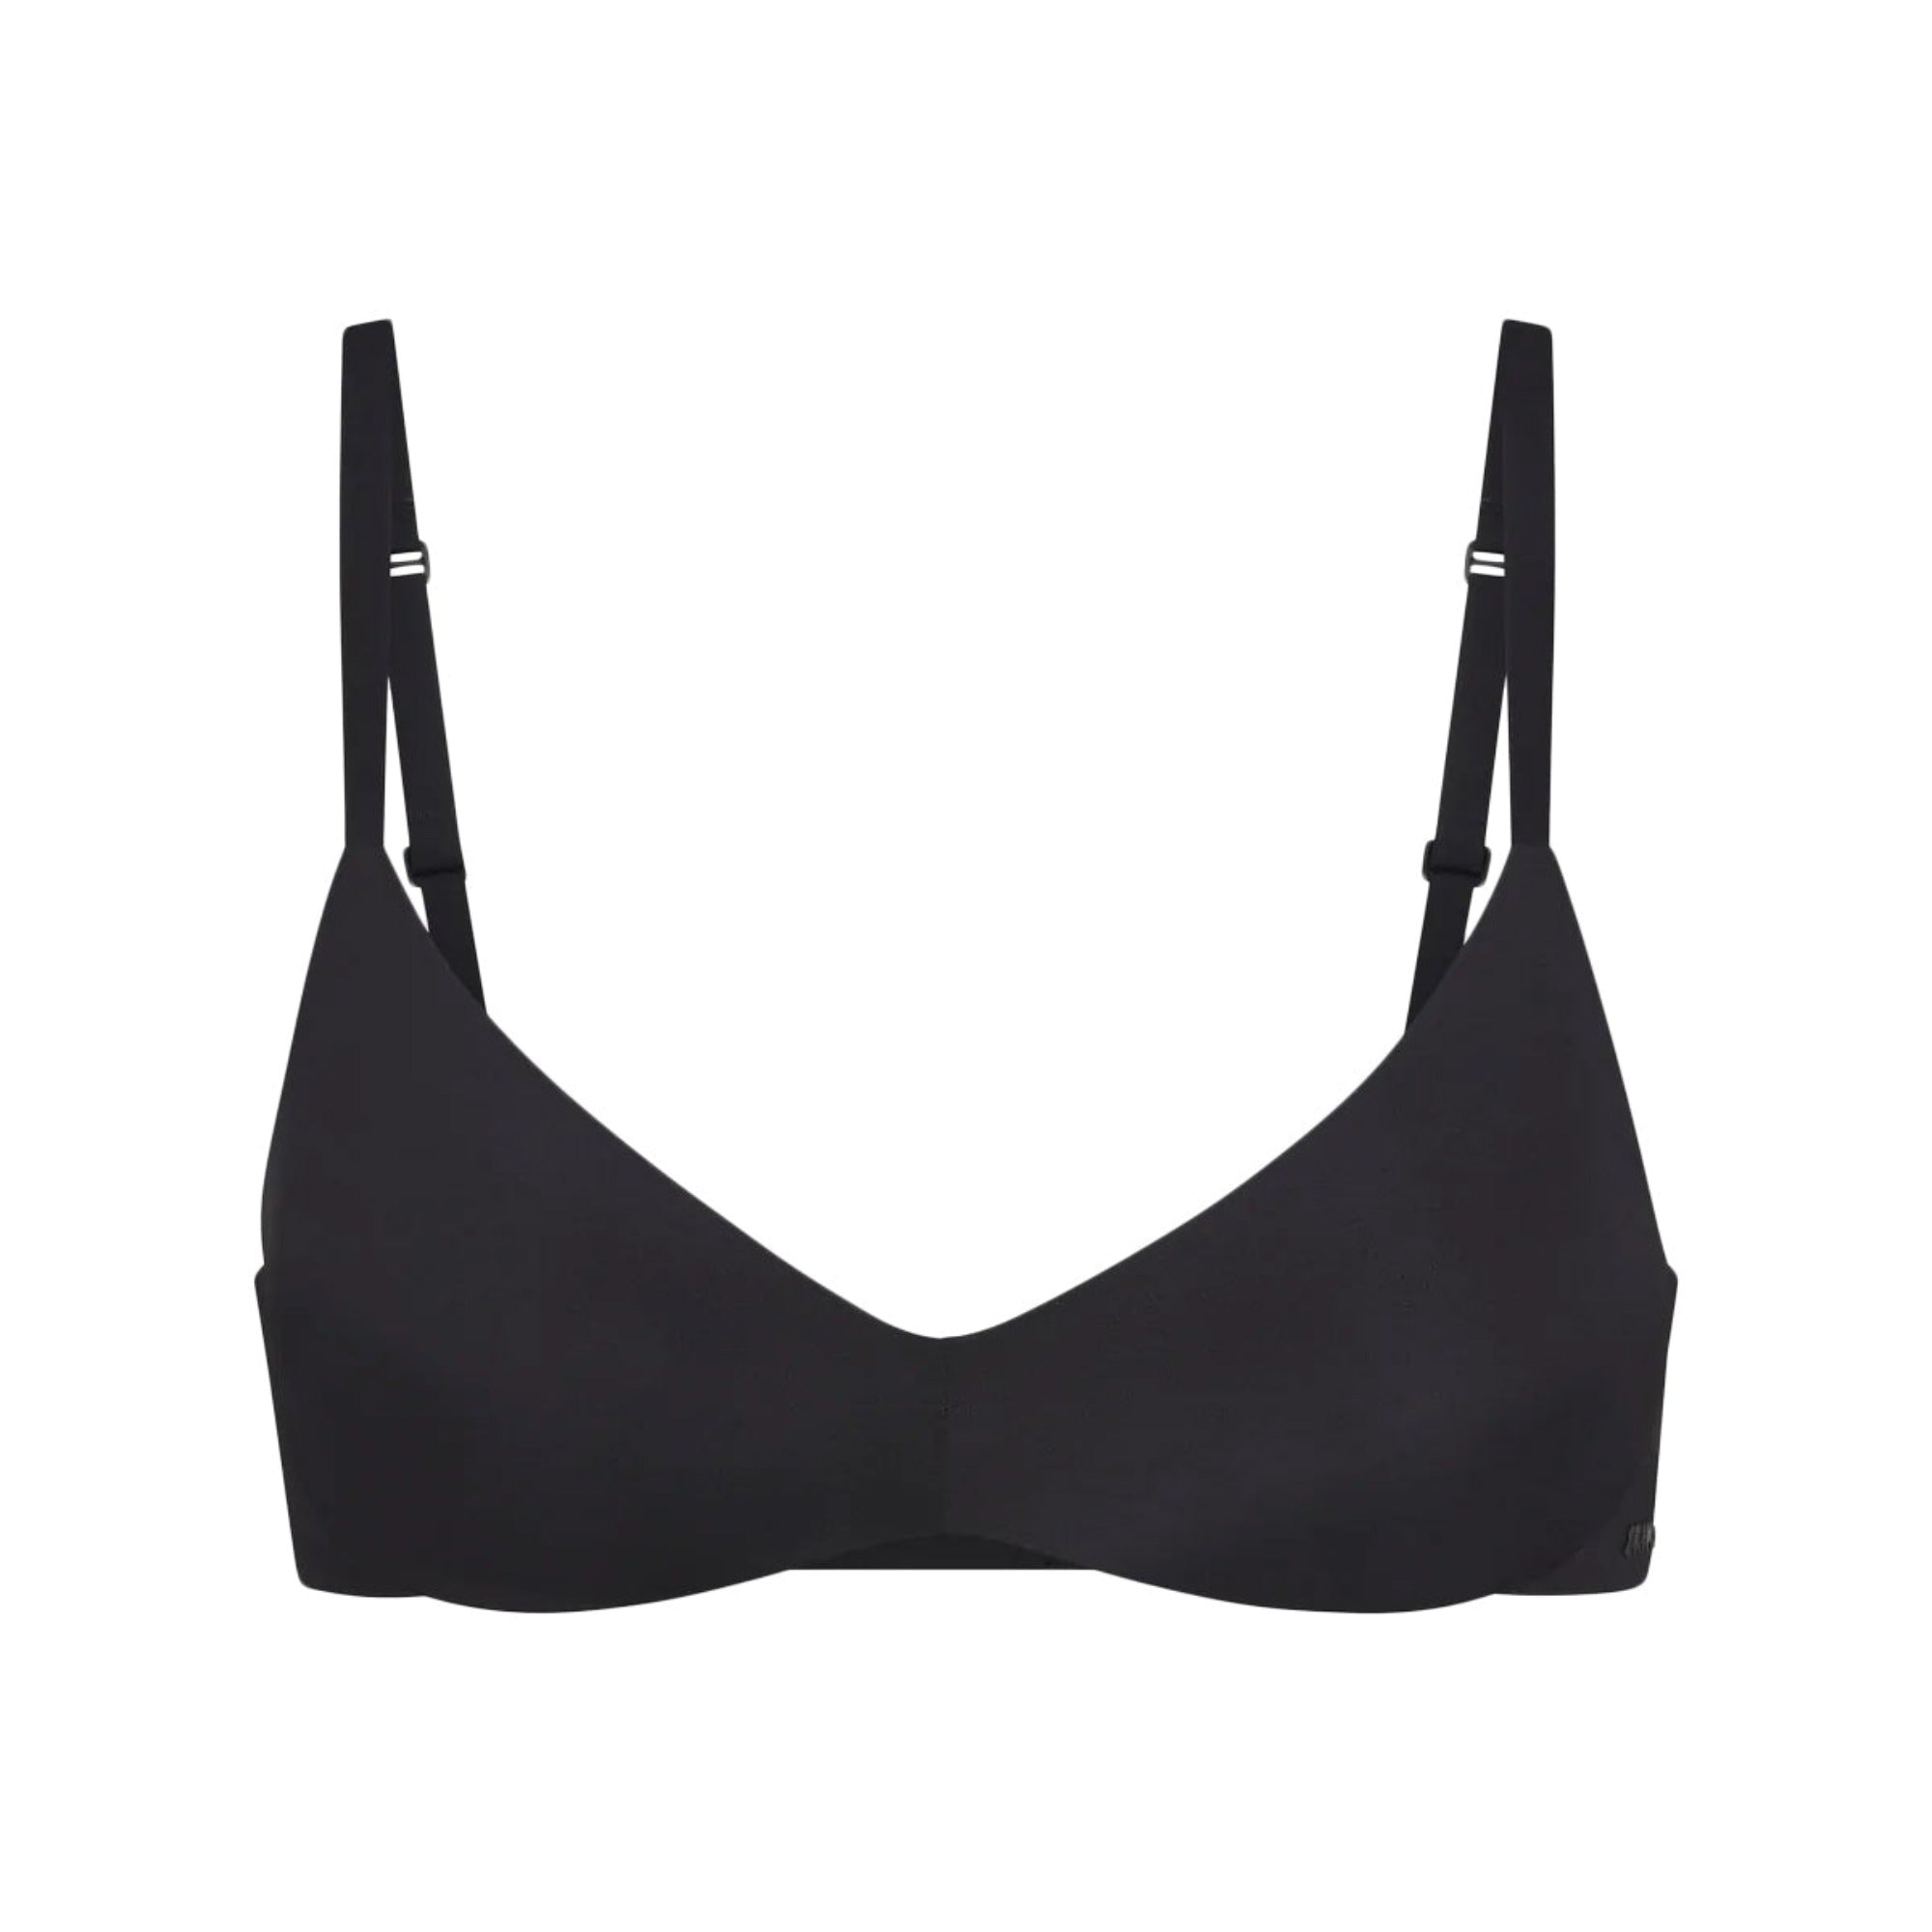 http://cdn.shopify.com/s/files/1/0259/5448/4284/products/SKIMS-BRA-BR-WRL-1891-ONX_8549fcaf-3b2a-4a6e-b413-c45abdbec0ba.jpg?v=1680726580